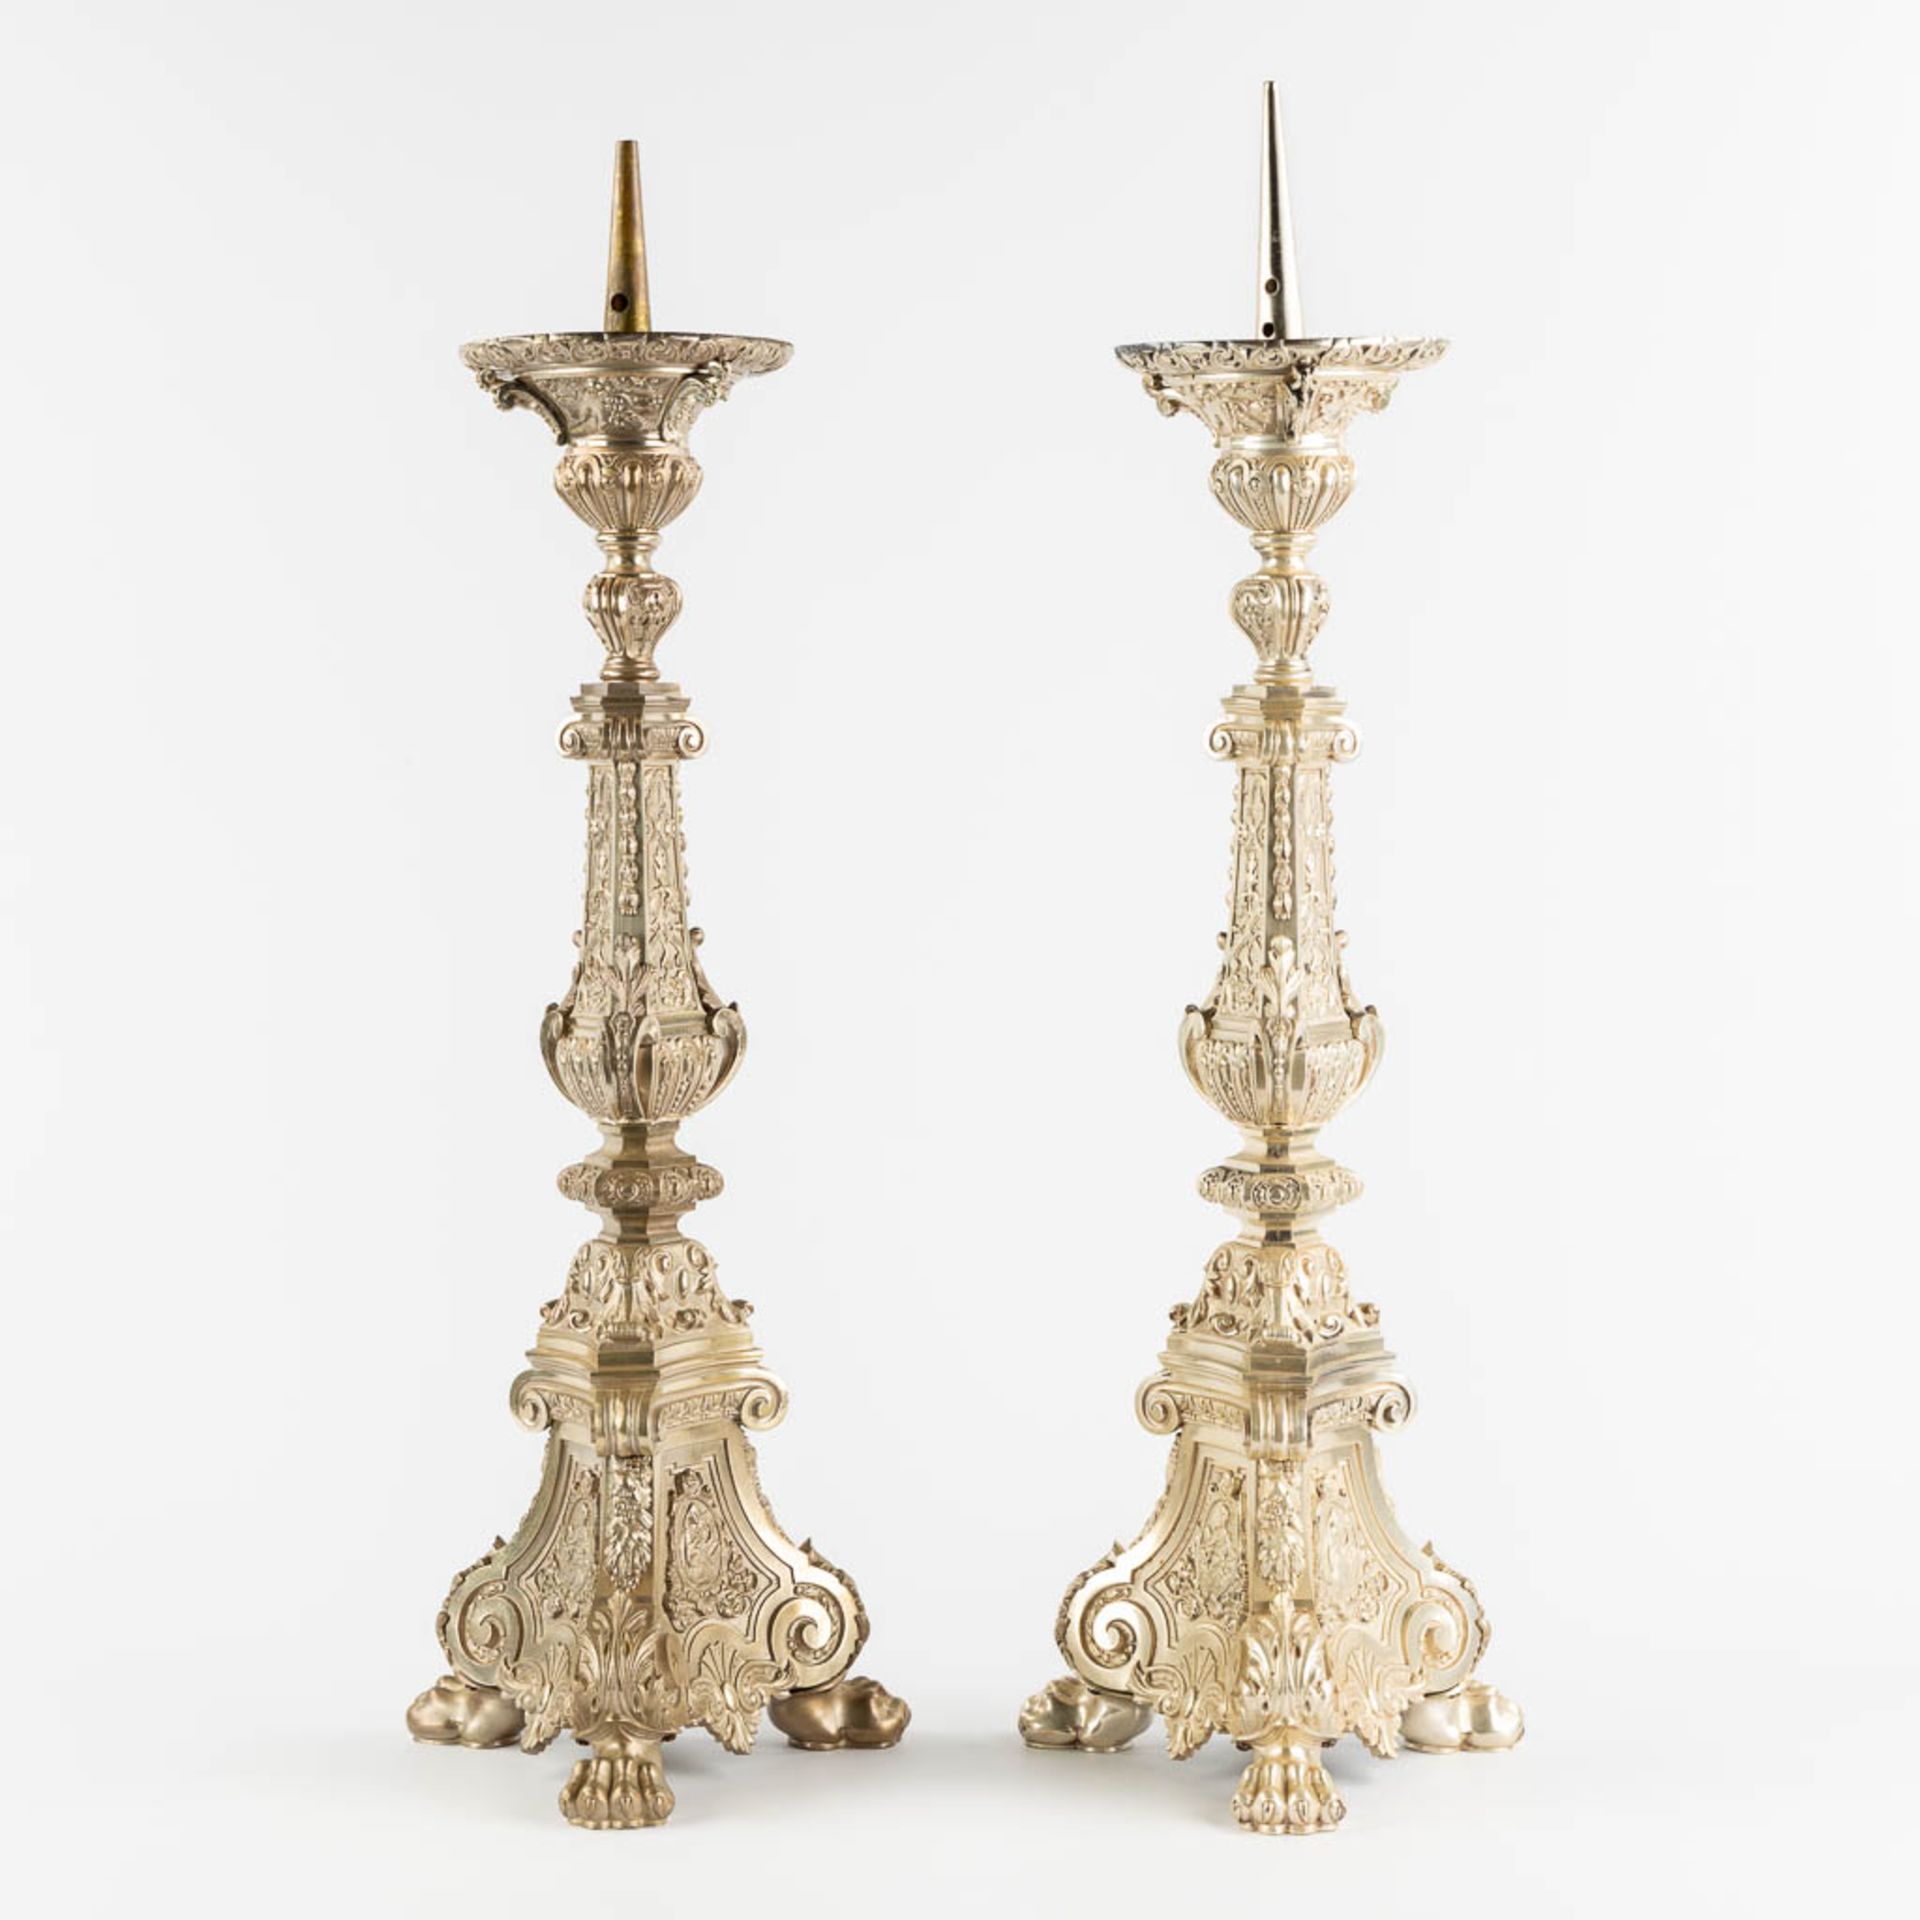 A pair of church candlesticks, silver-plated bronze. (L:24 x W:24 x H:78 cm) - Image 3 of 12